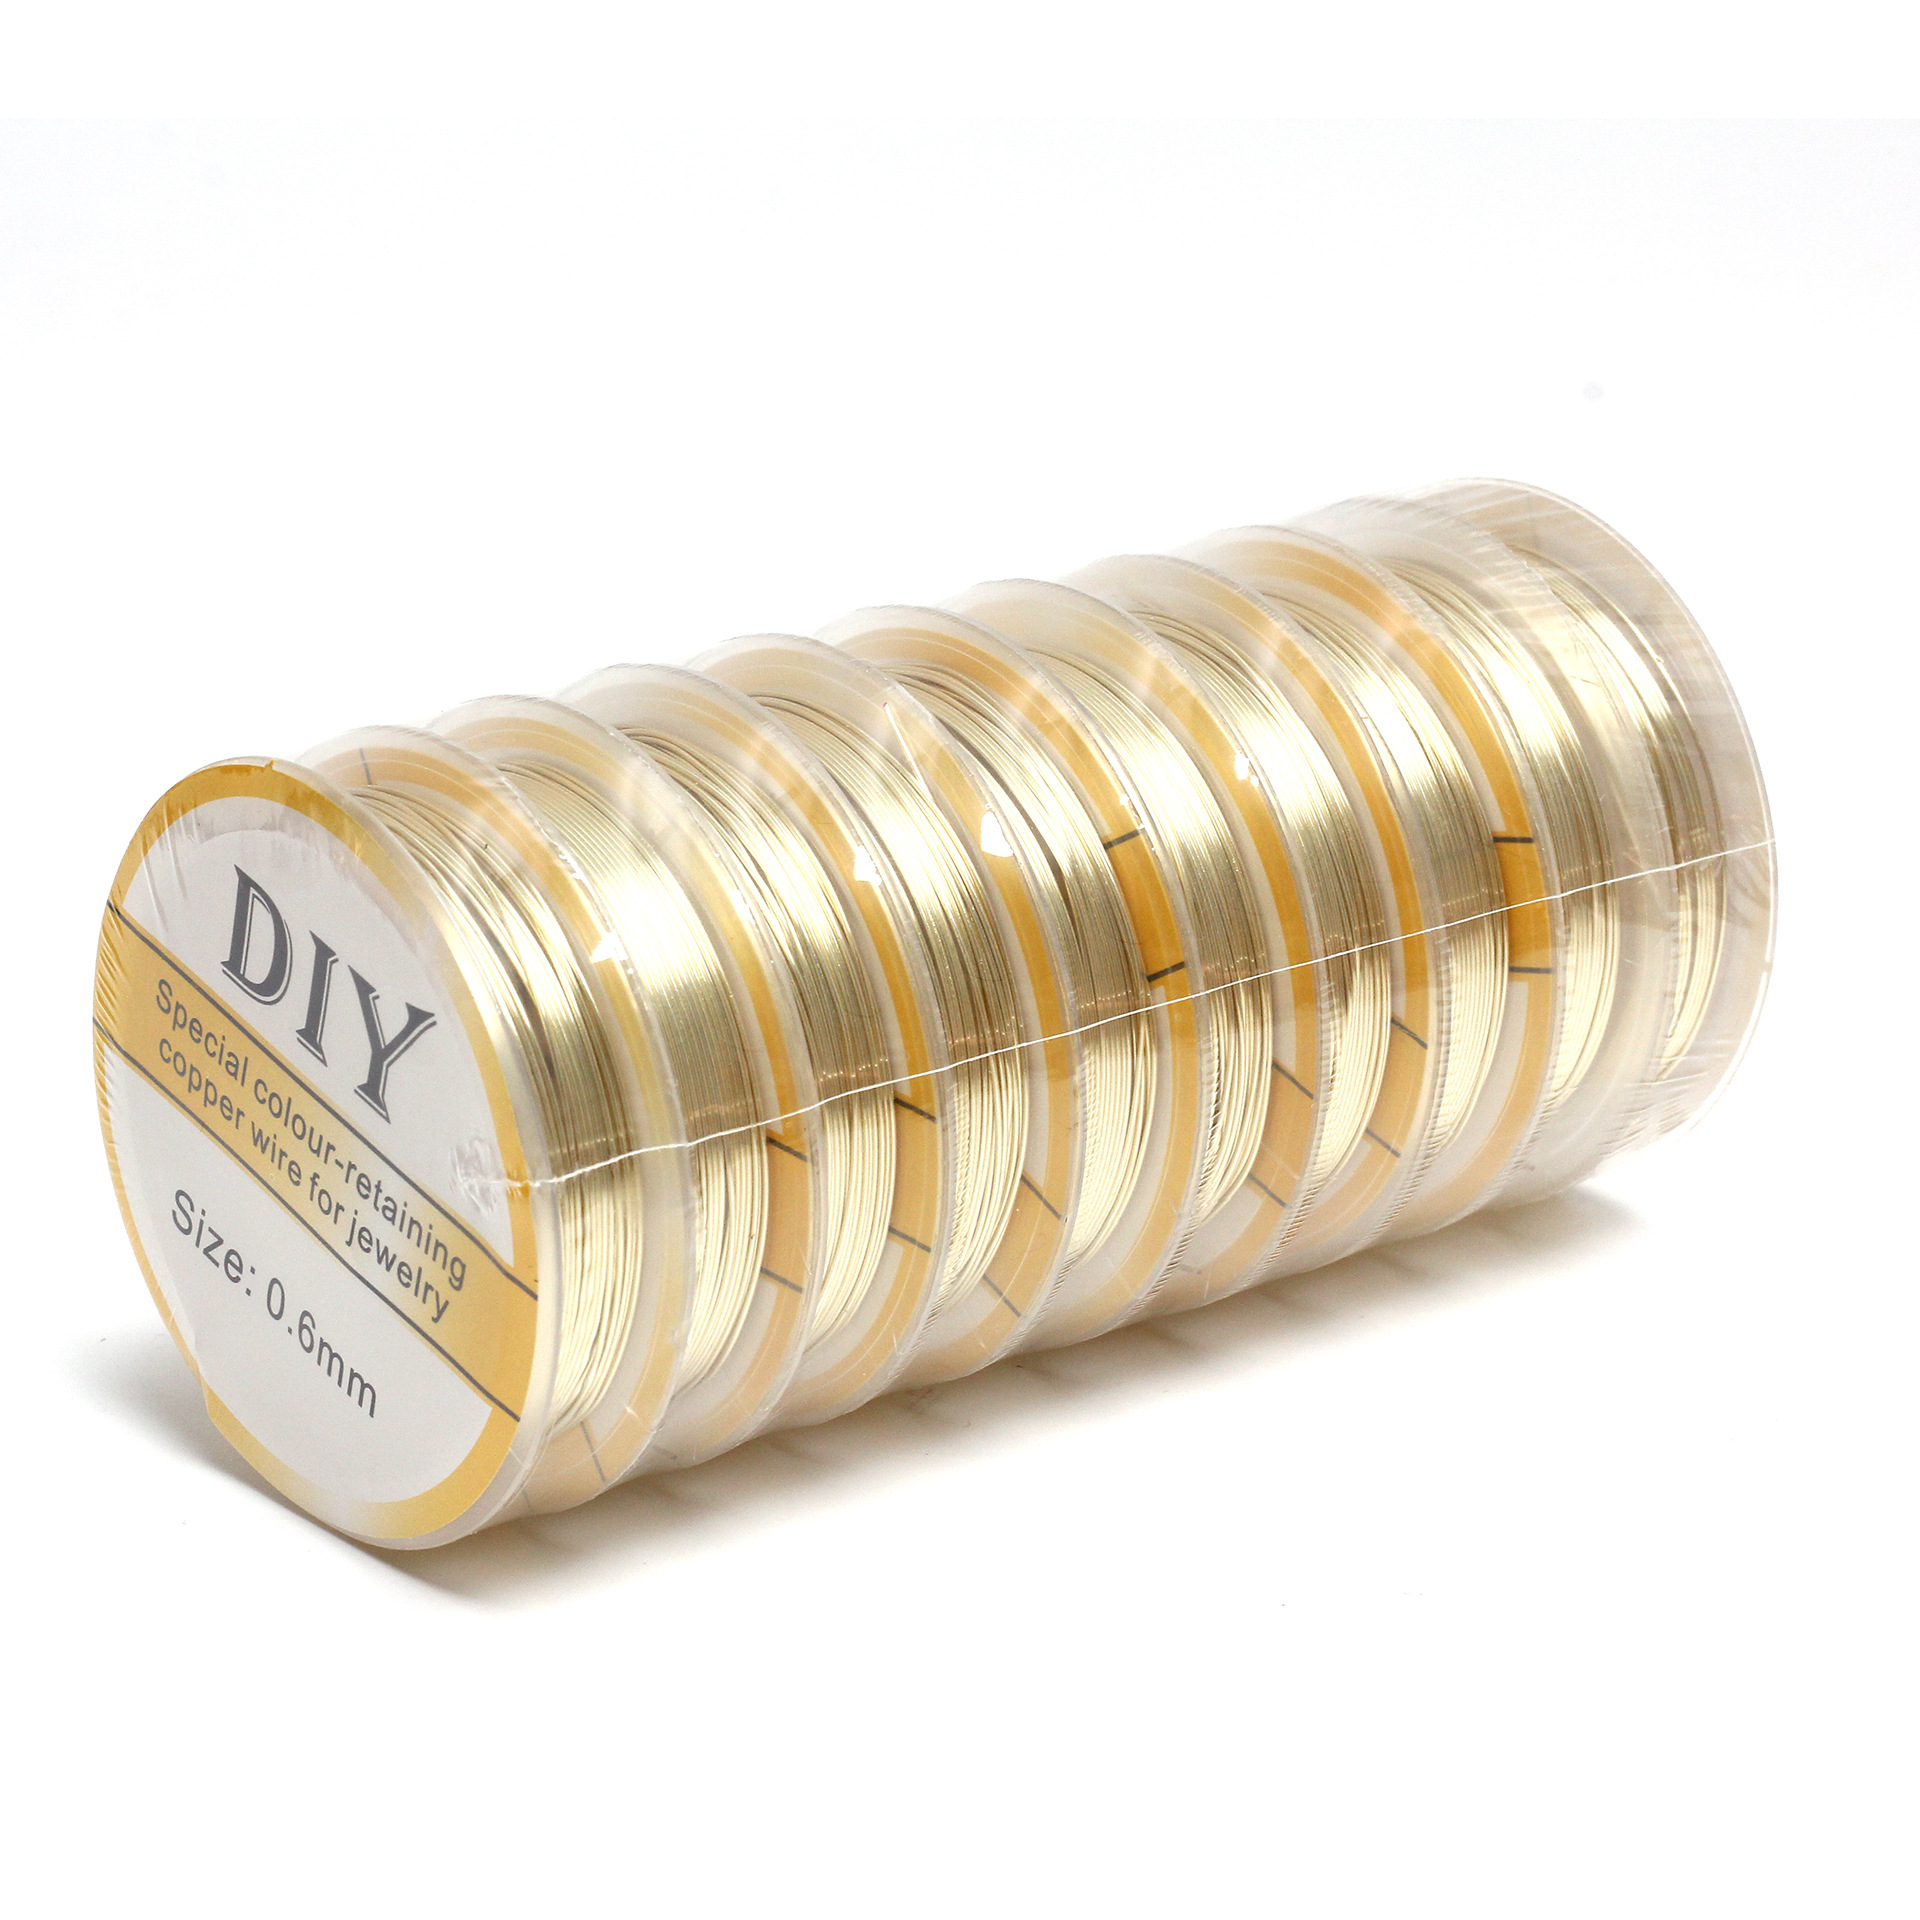 Light Gold 0.6mm copper wire one 4.5m